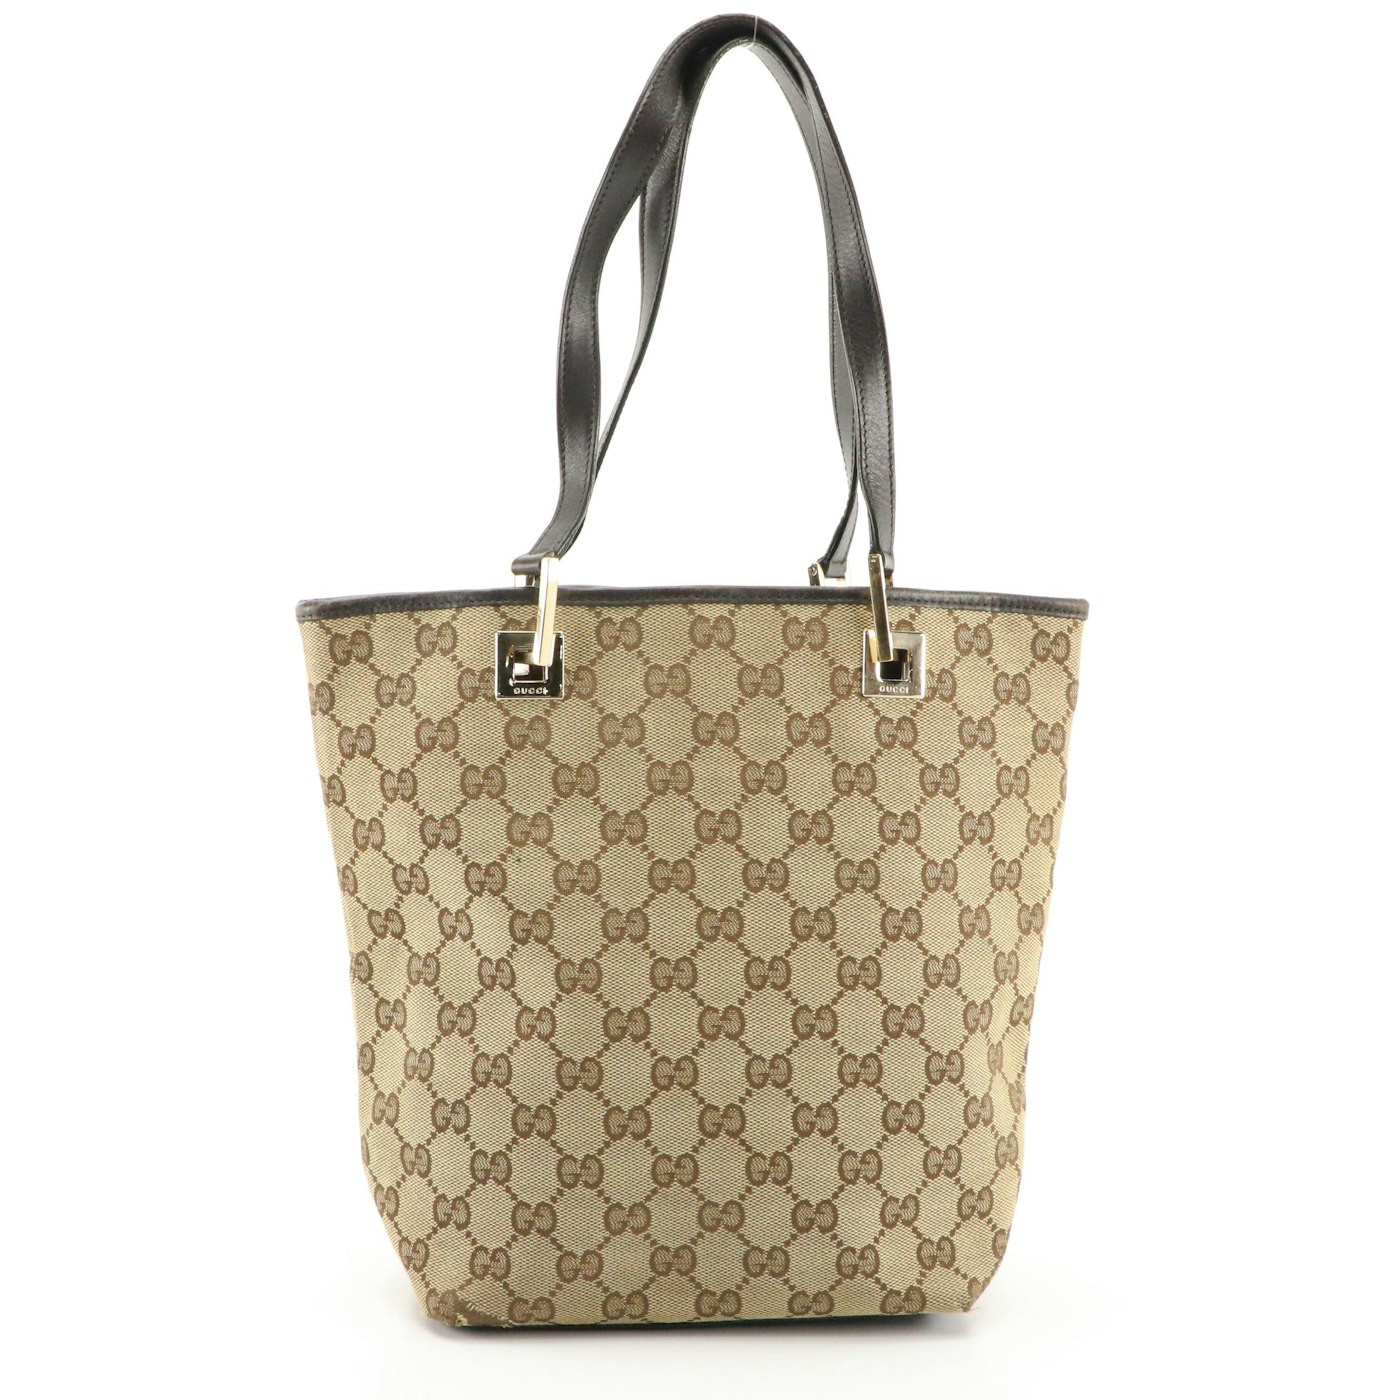 Gucci Handbag Tote in GG Canvas with Brown Leather Trim | EBTH